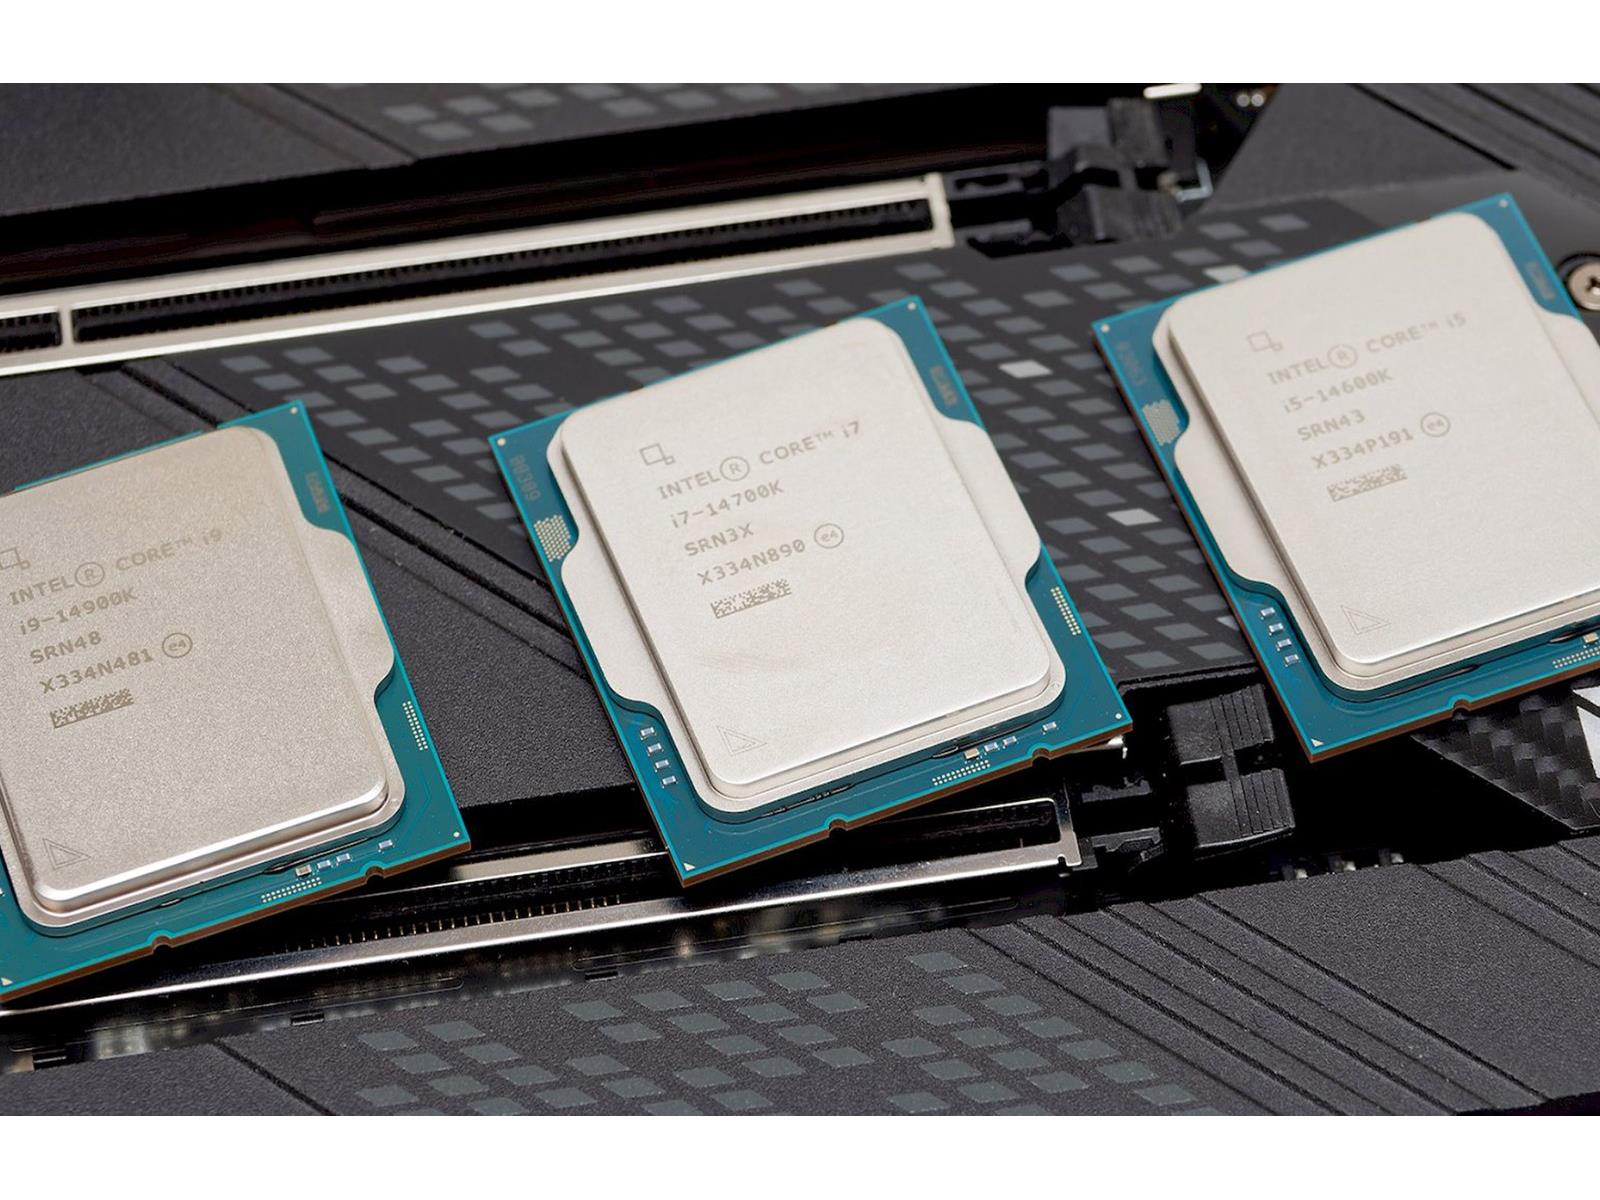 Intel Core i9-14900K review: Too hot to handle